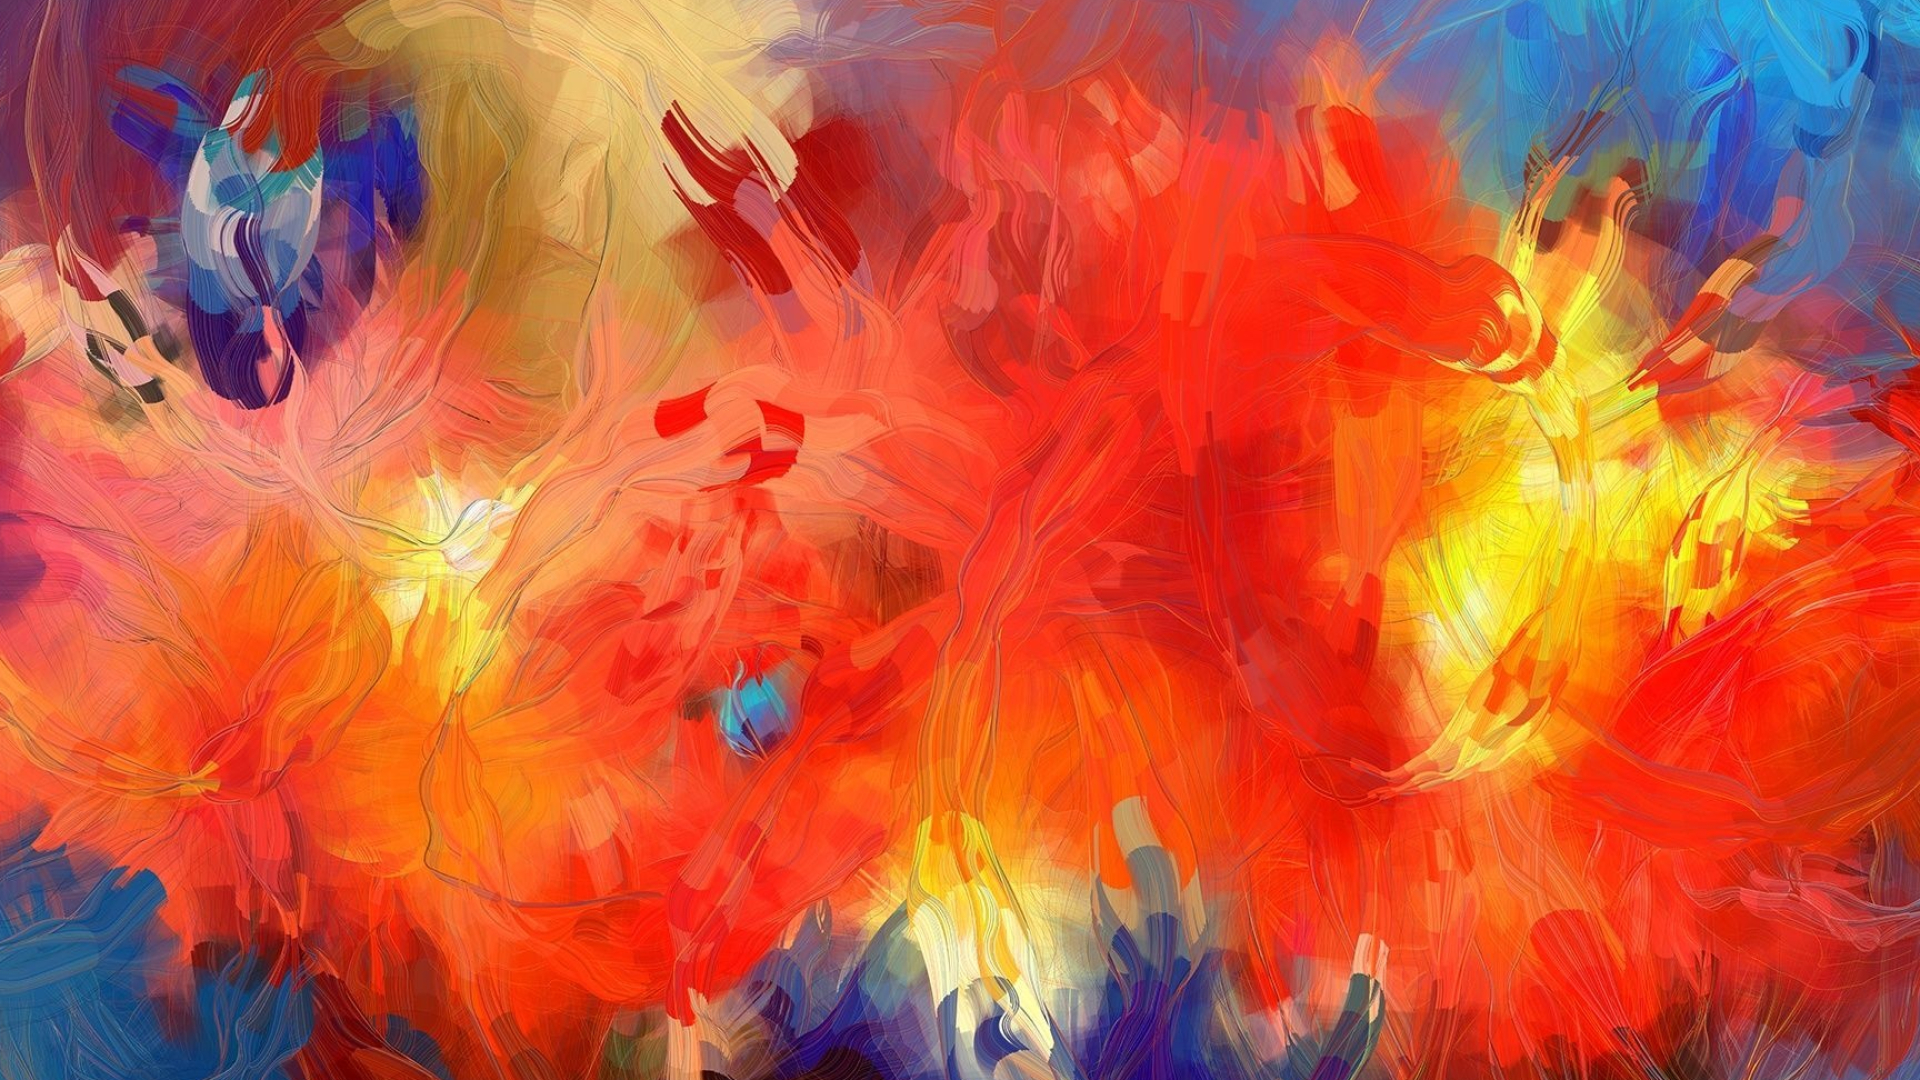 Abstract paint wallpapers, Colors, Backgrounds, Artistic, 1920x1080 Full HD Desktop